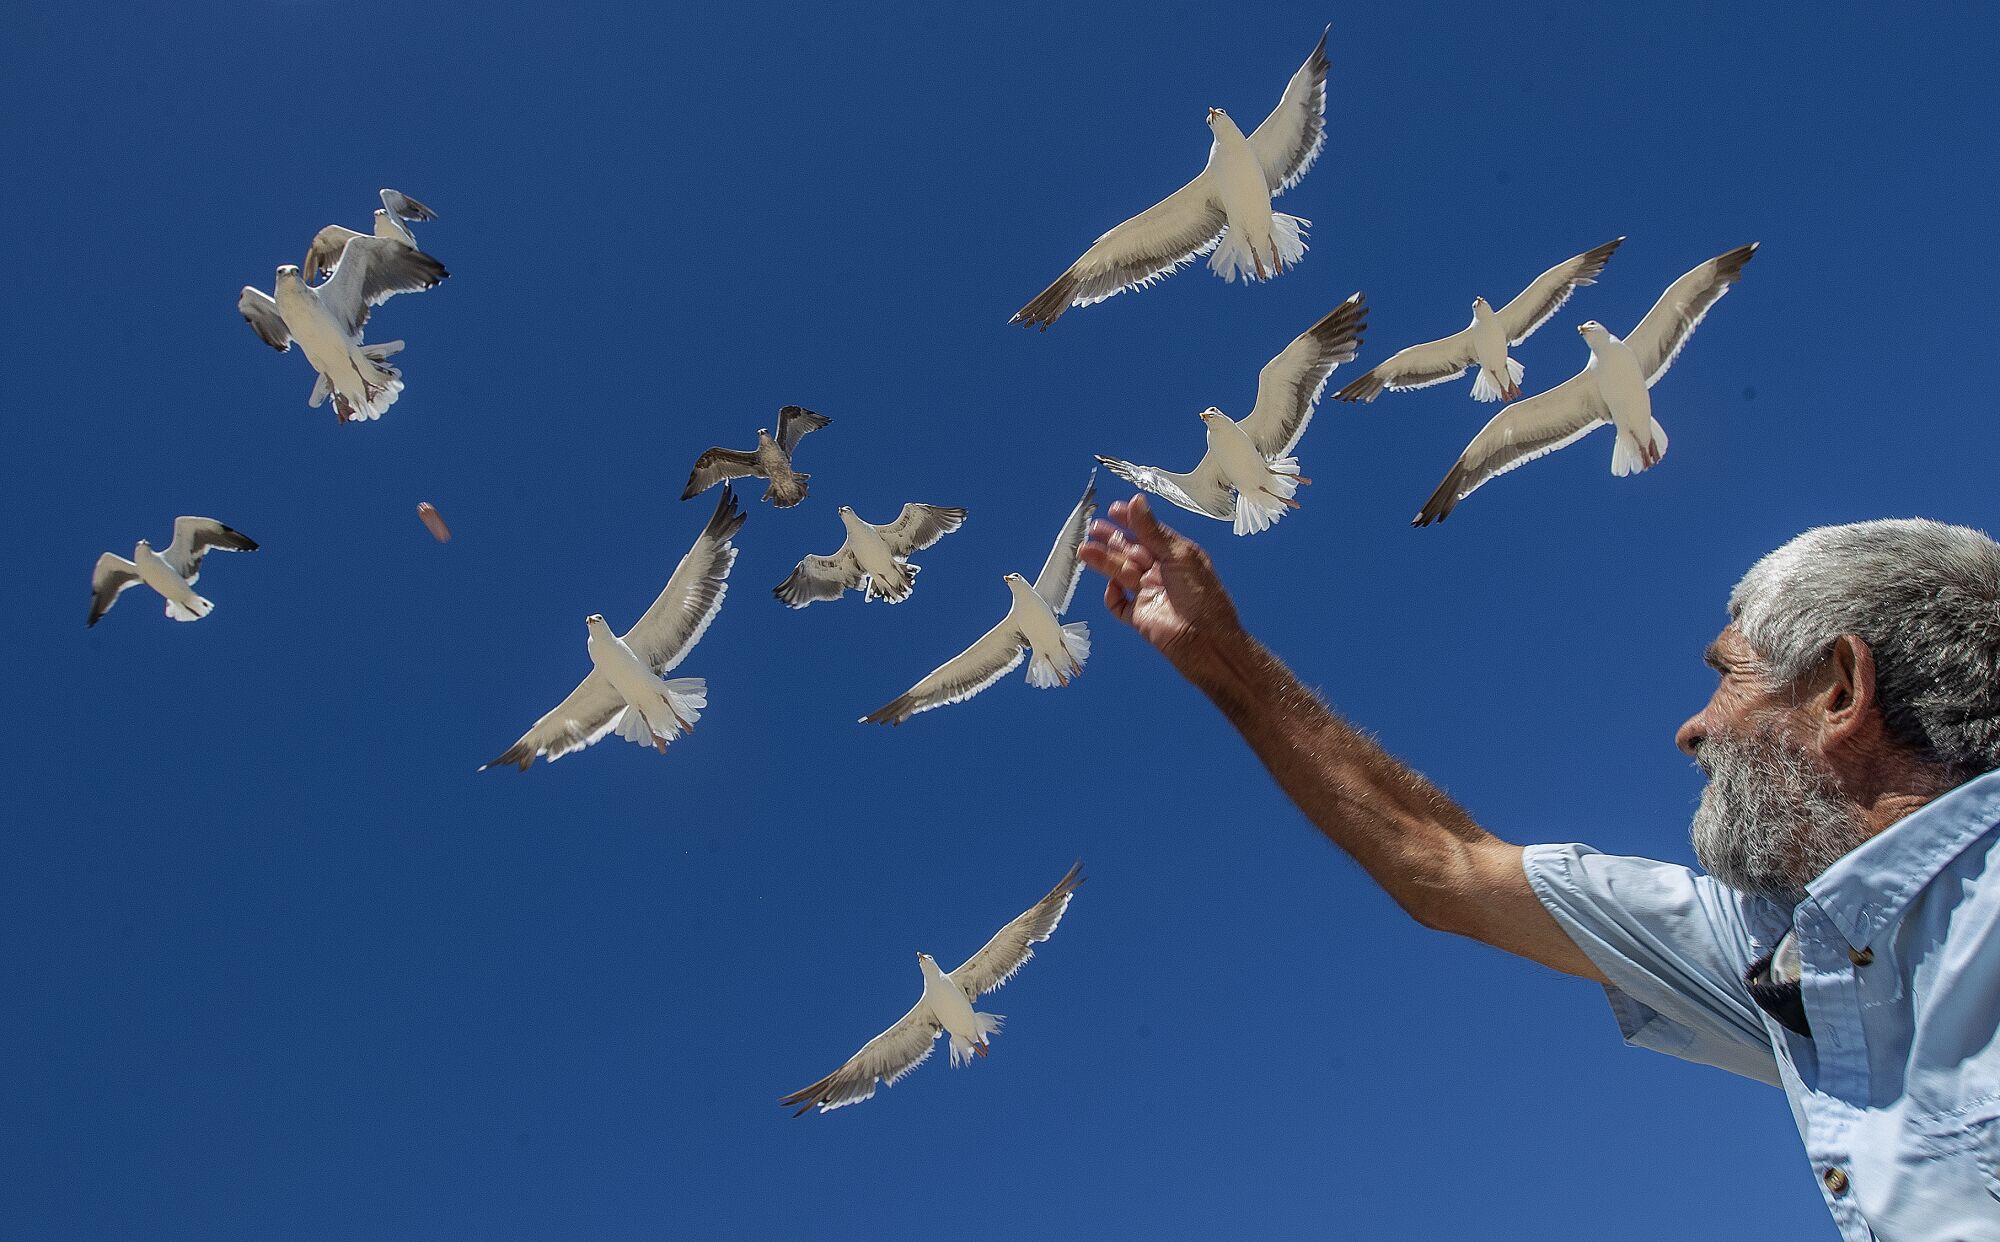 Augustine Hurtado tosses another chicken frank into the air while feeding the seagulls at Santa Monica State Beach.